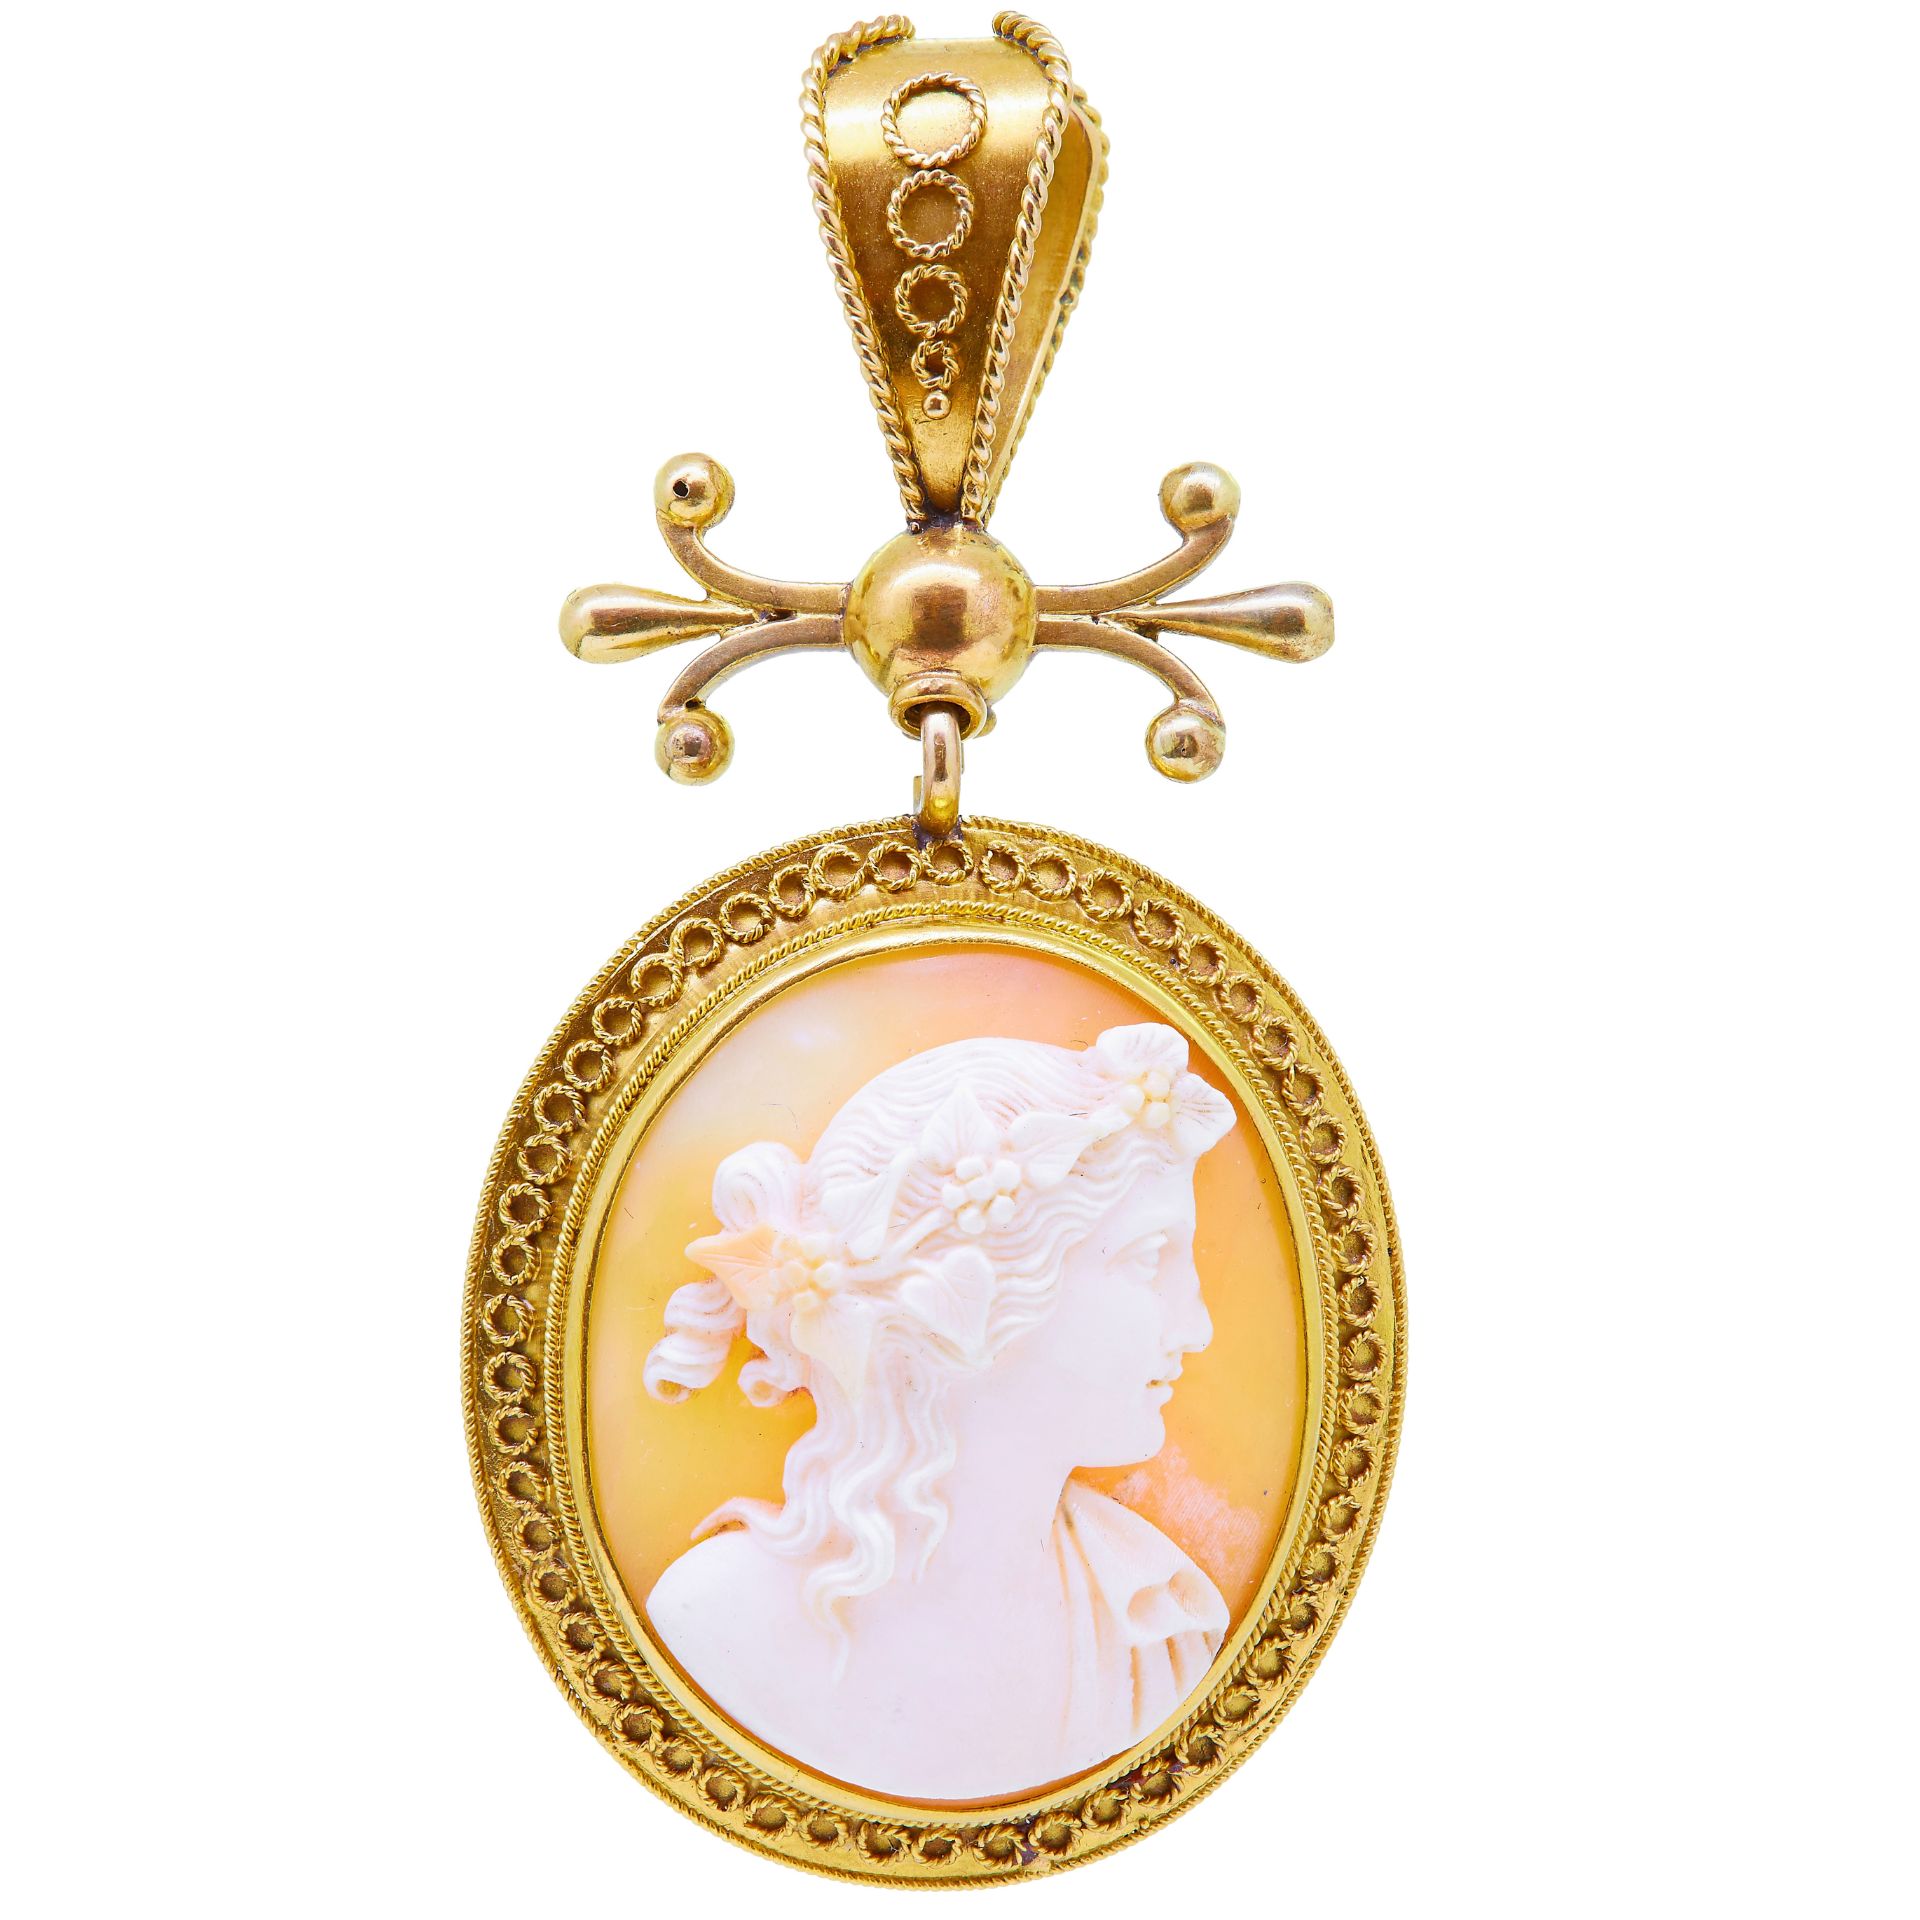 NO RESERVE, ANTIQUE VICTORIAN CARVED SHELL CAMEO PENDANT